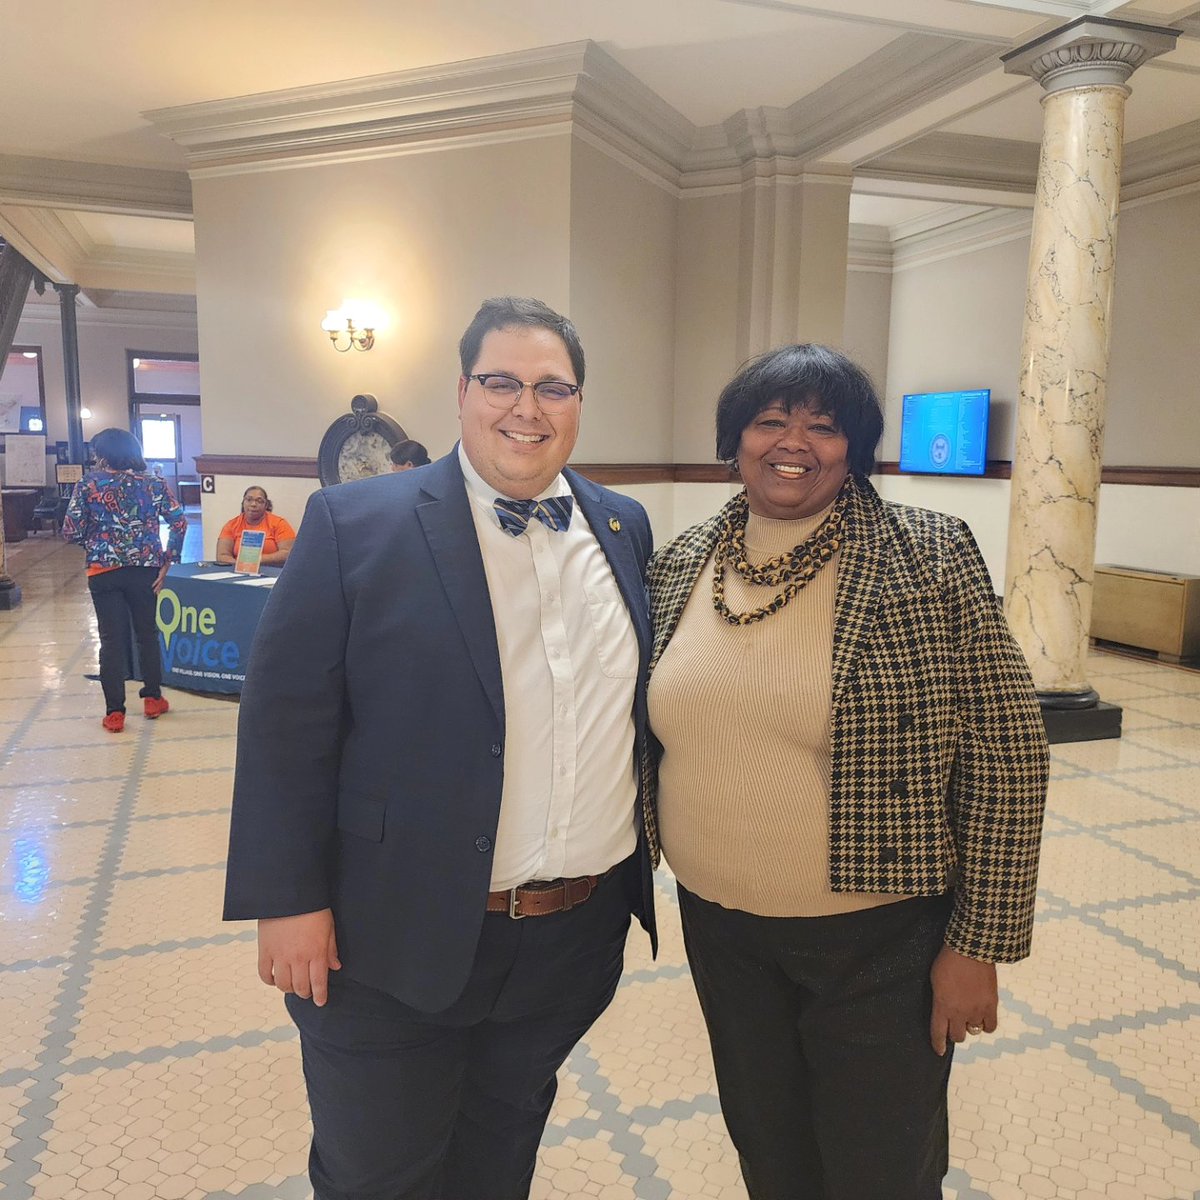 Reentry Day @ the Capitol with the MS Reentry Coalition members #reentrymatters #housing #jobs #votingrights #mentalhealth #equalpay #secondchances #MS  #vitalrecords #removingbarriers #entrepreneurship #licenses #RECH #helpinthehouse #solutionist #iamaningredient #JusticeGeneral